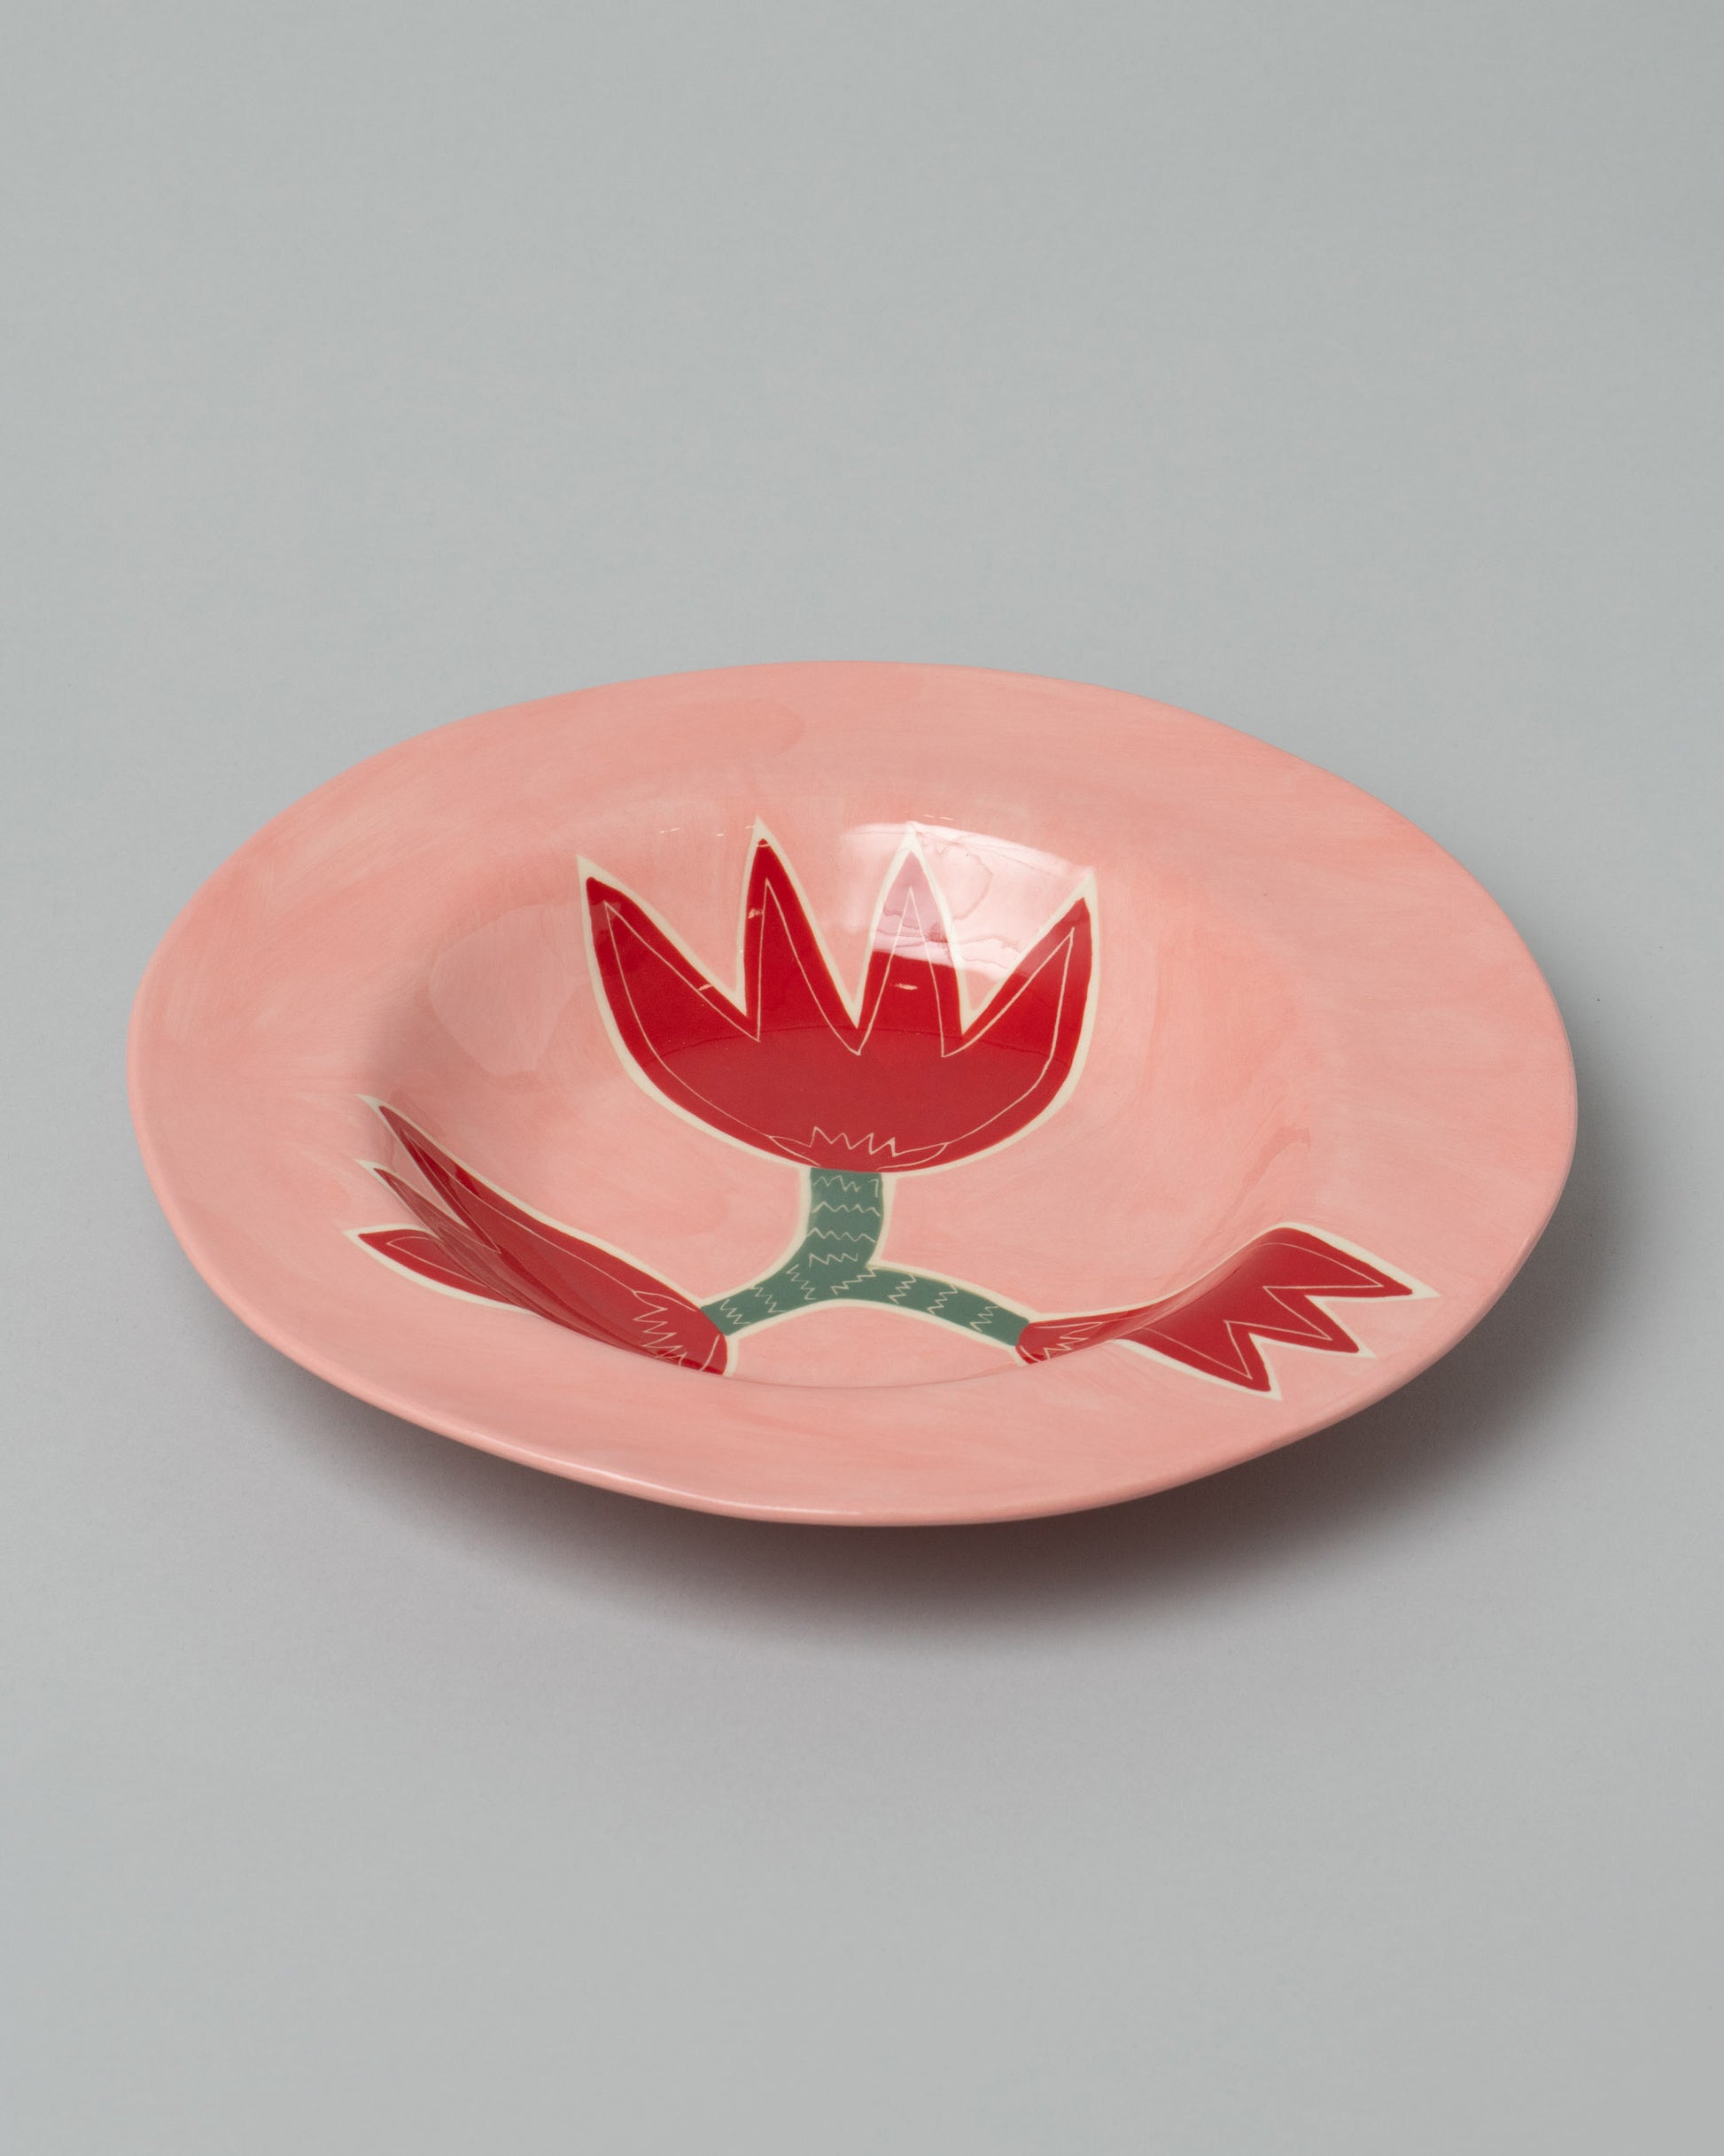 Laetitia Rouget Rose Dinner Plate on light color background.